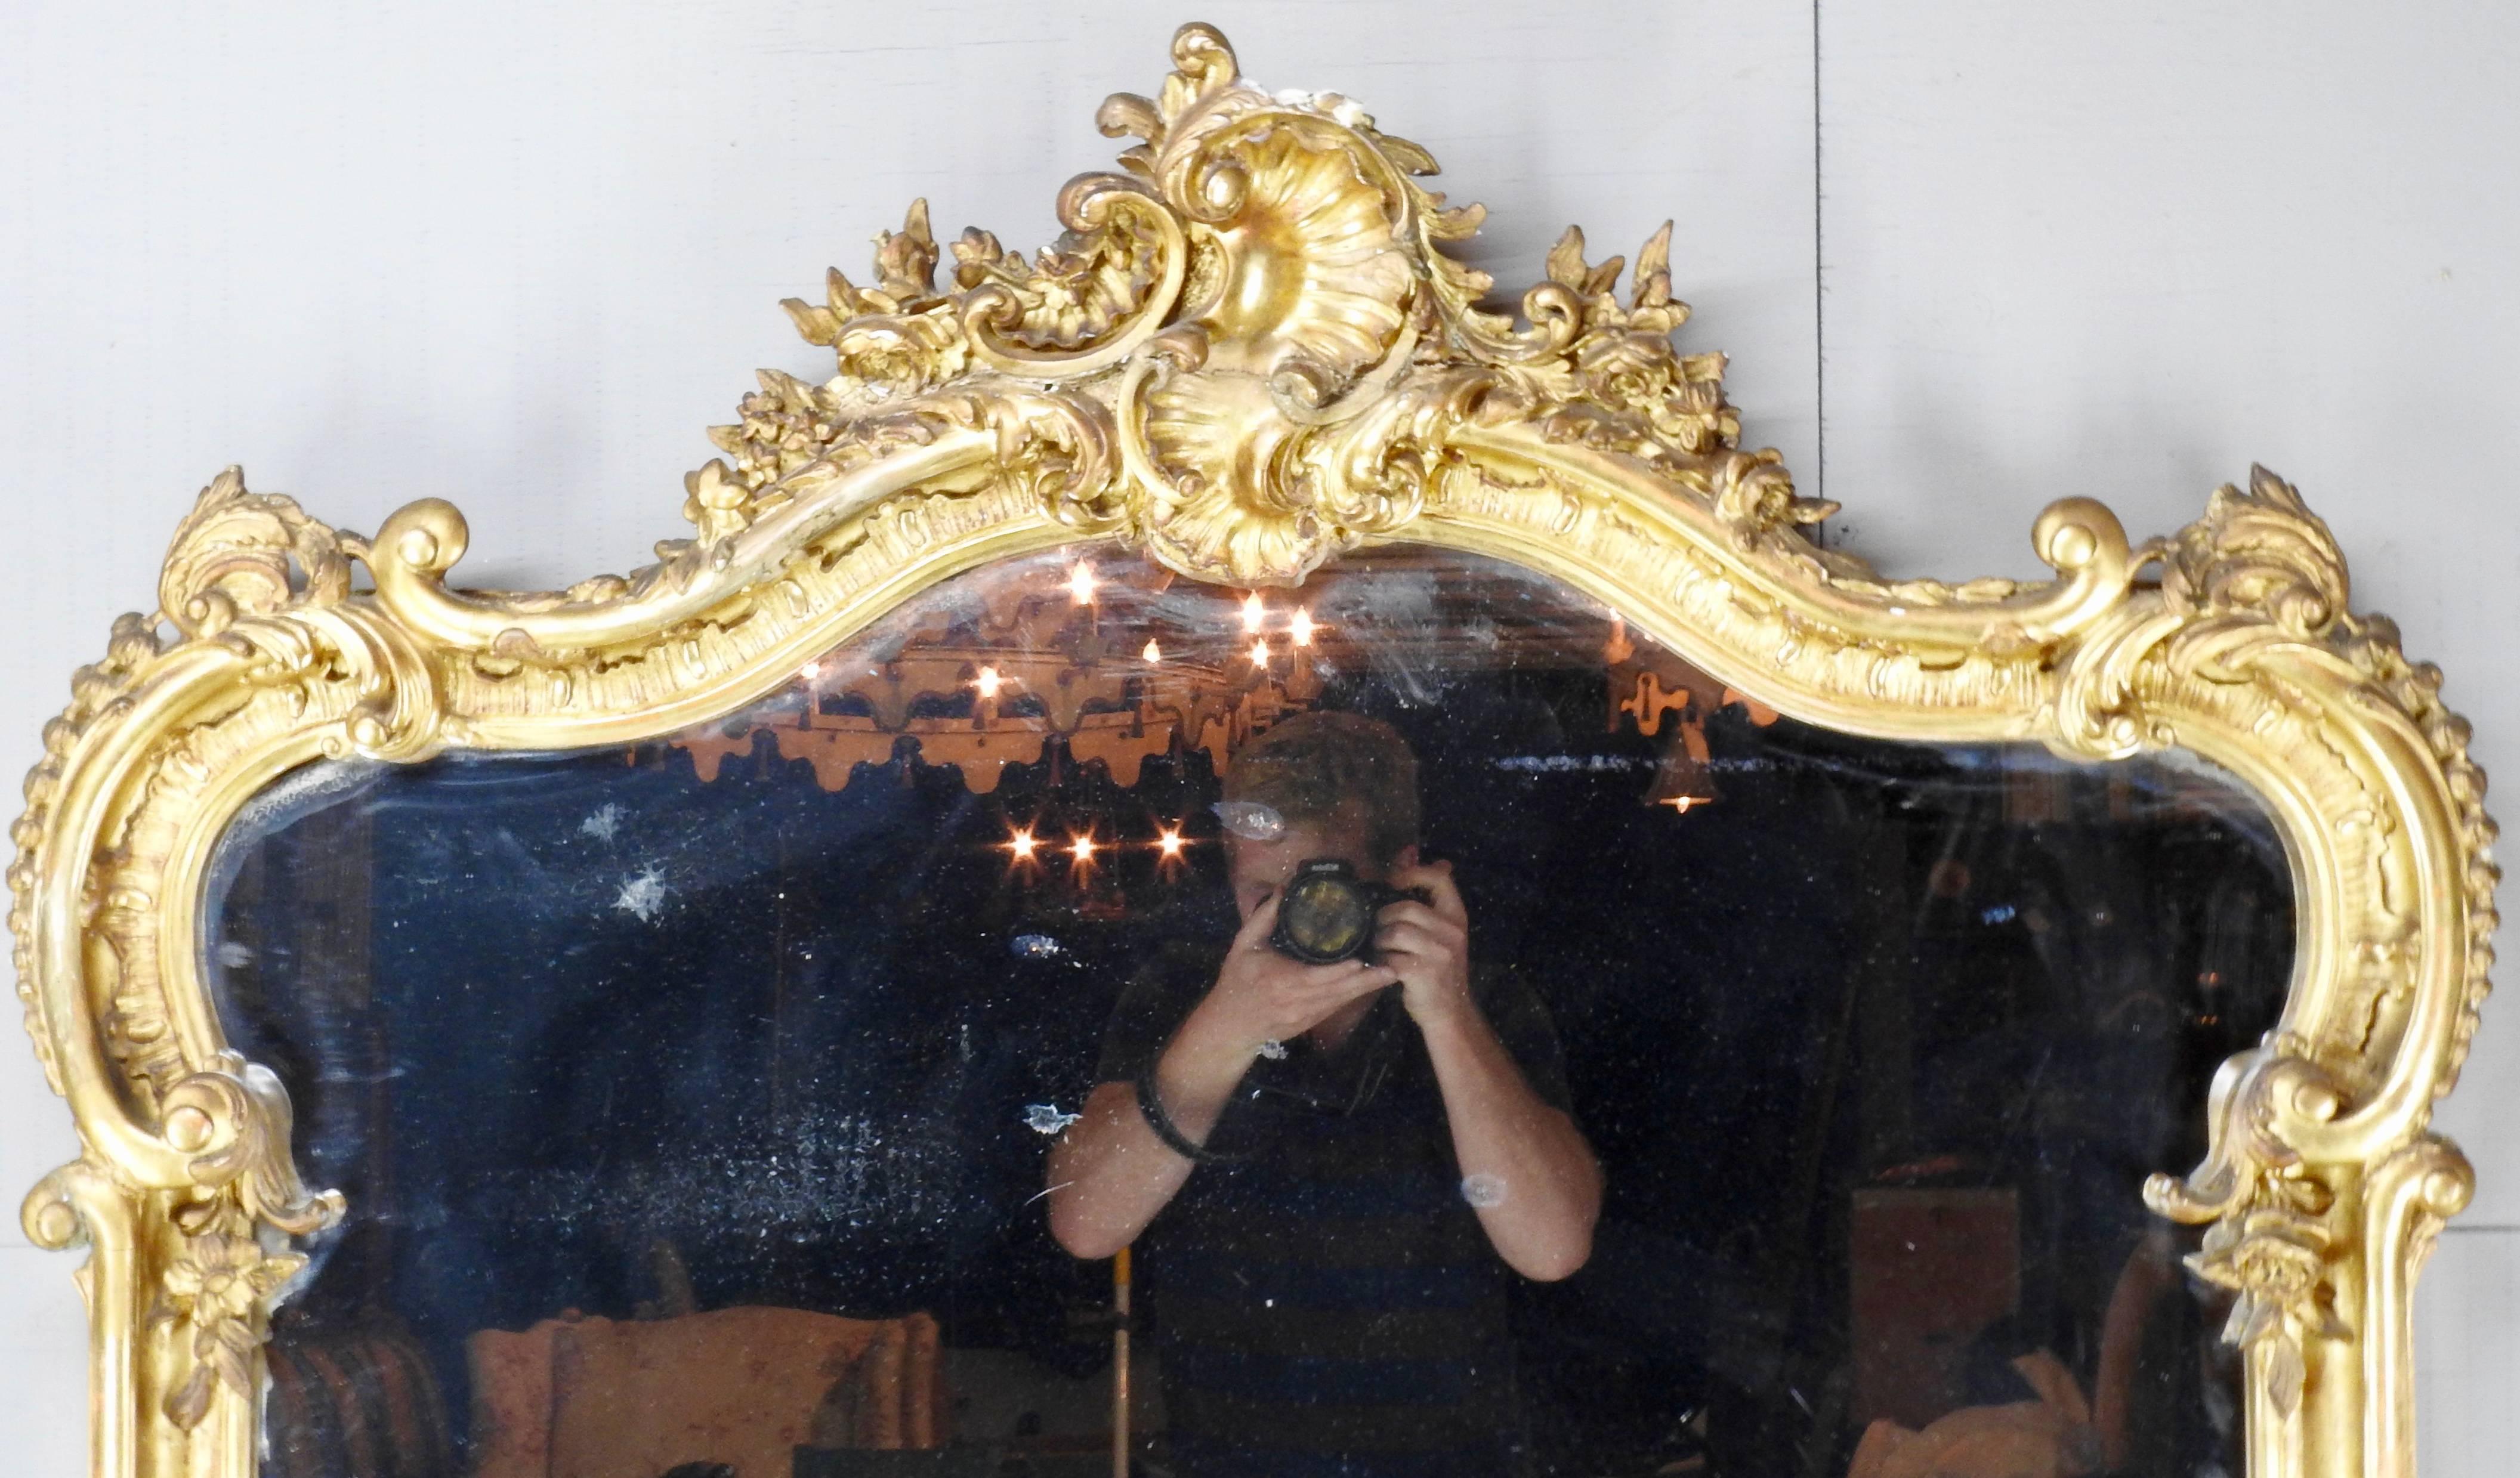 This beautiful 19th century French Rococo mirror is a show stopper. With the bold gilt over all the beautiful carvings give this mirror dimension.